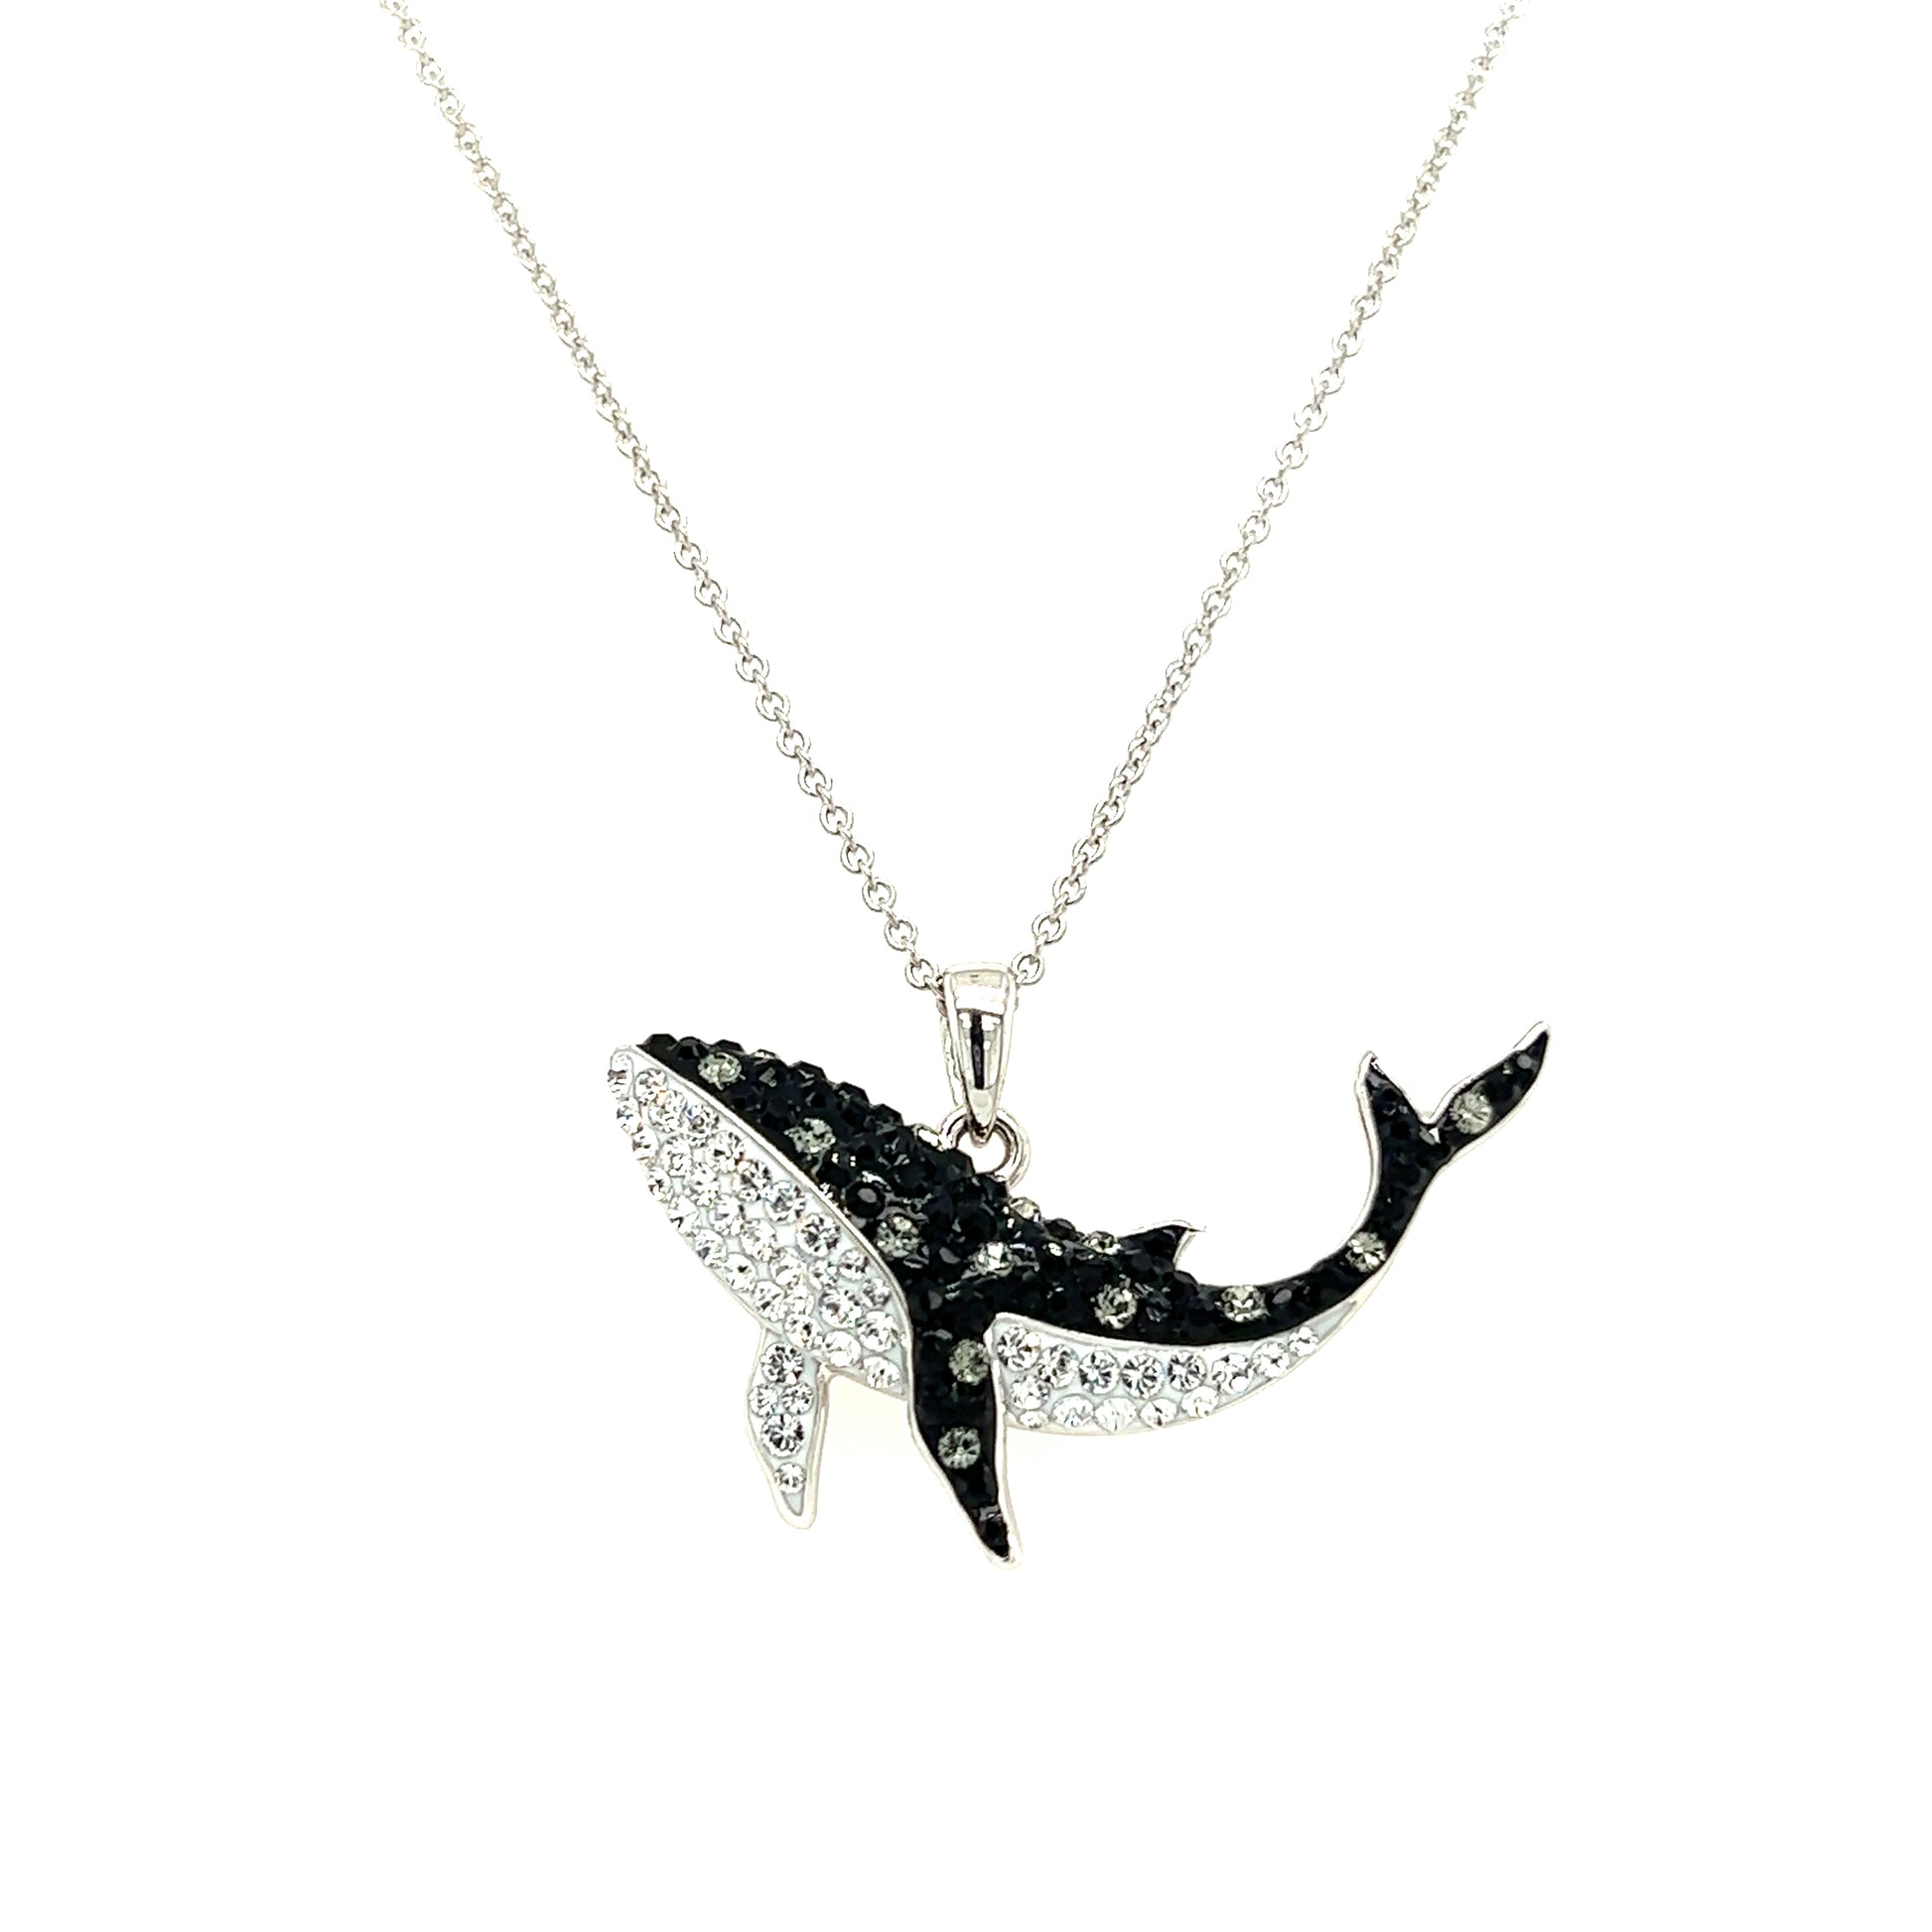 Orca Whale Necklace with Black and White Crystals in Sterling Silver Front View